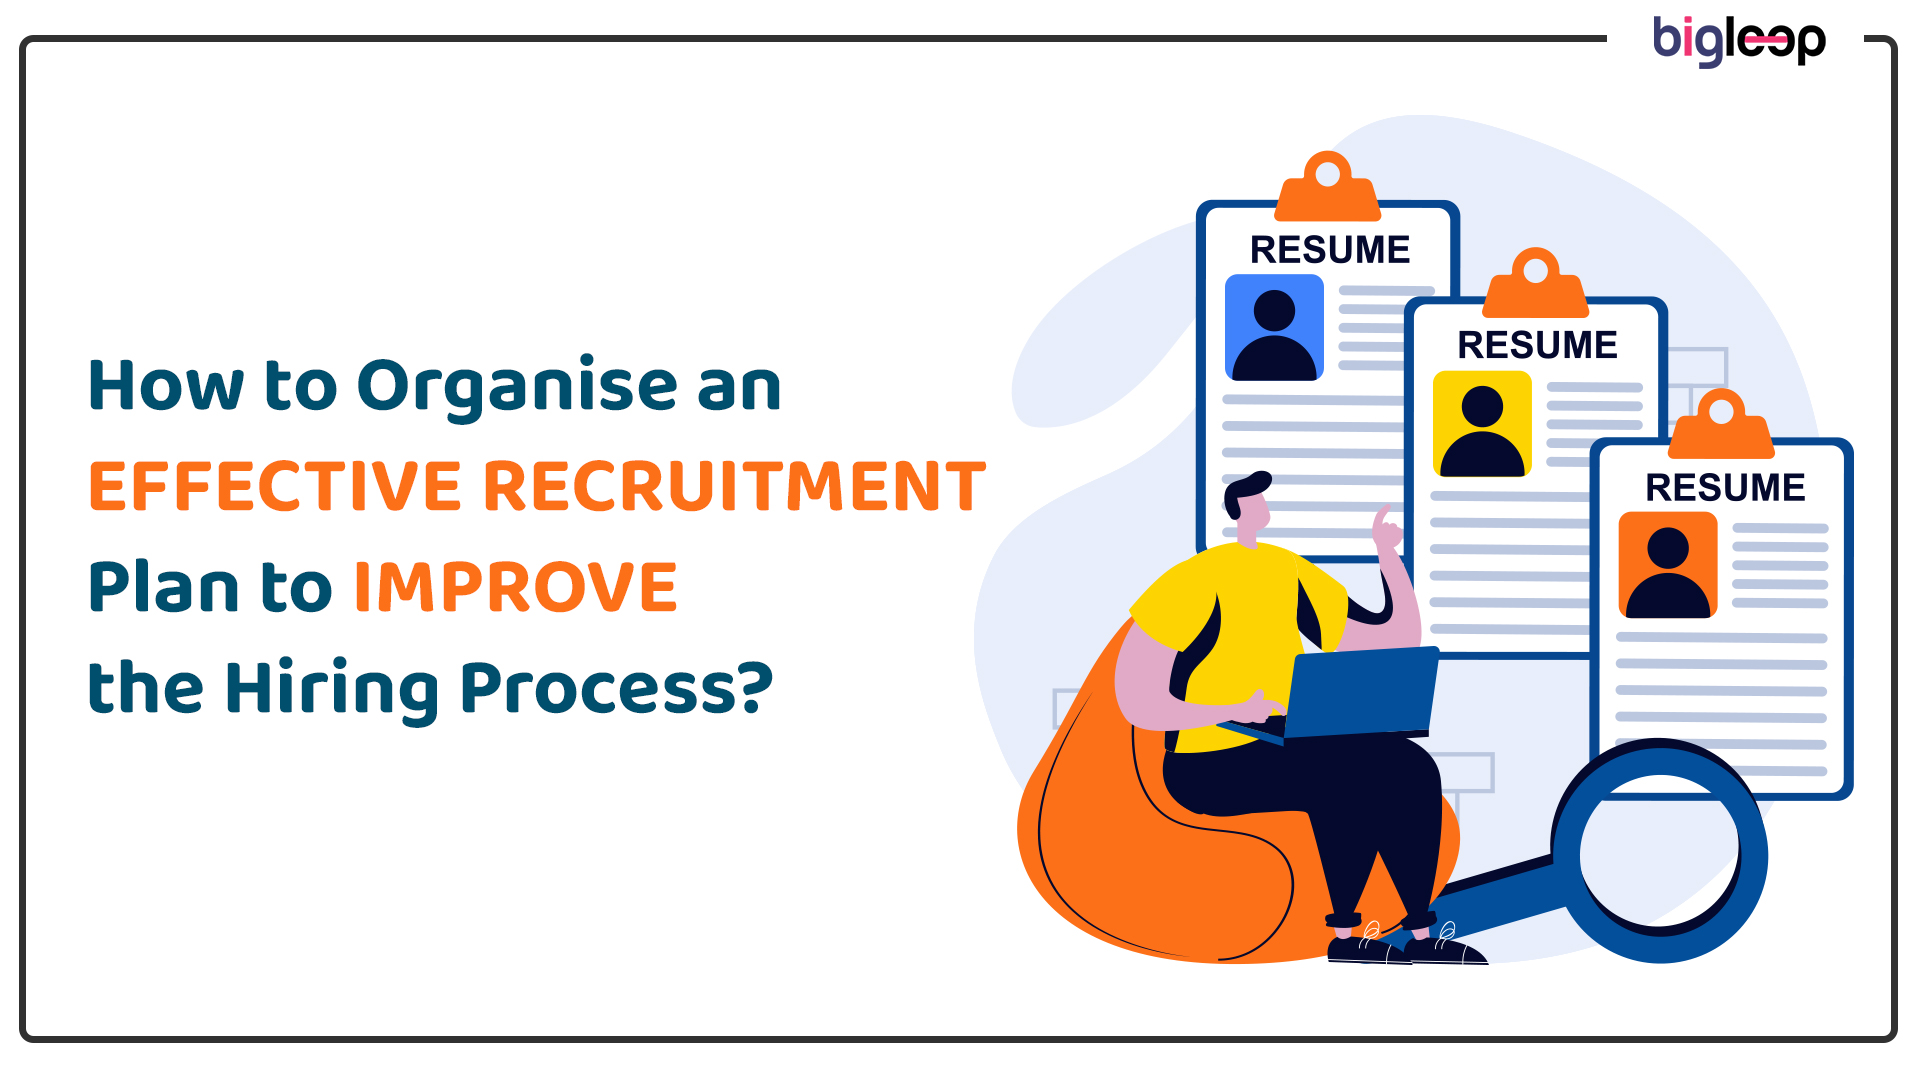 How to Organize an Effective Recruitment Plan to Improve the Hiring Process?